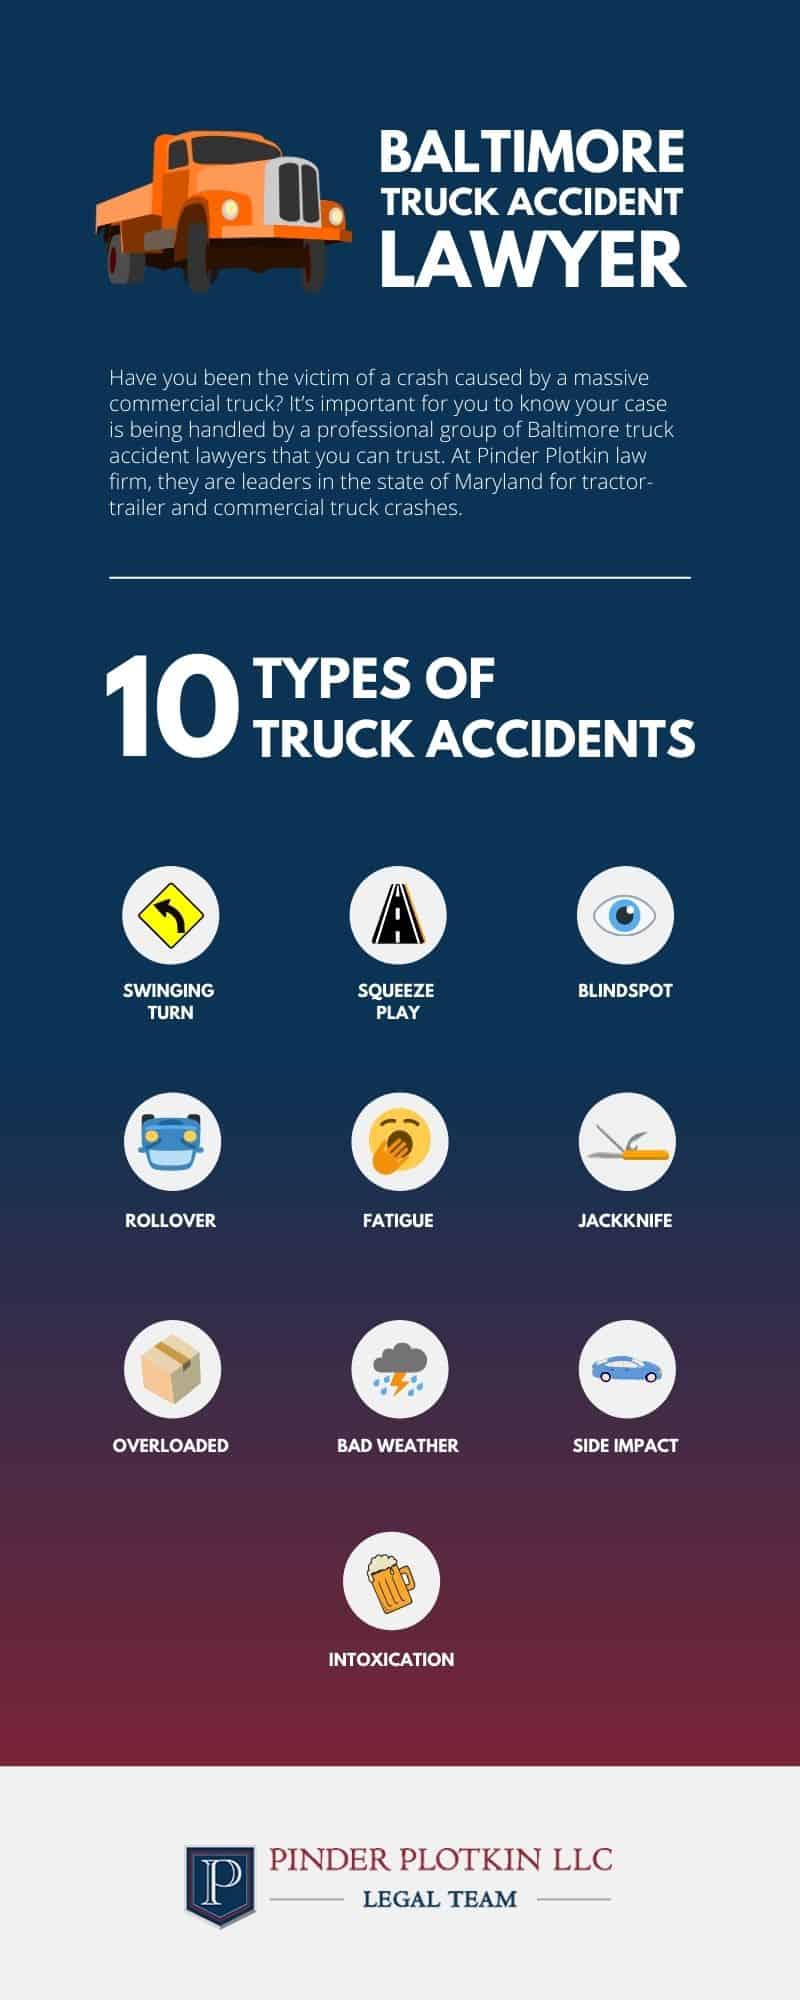 Baltimore Truck Accident Lawyer Infographic